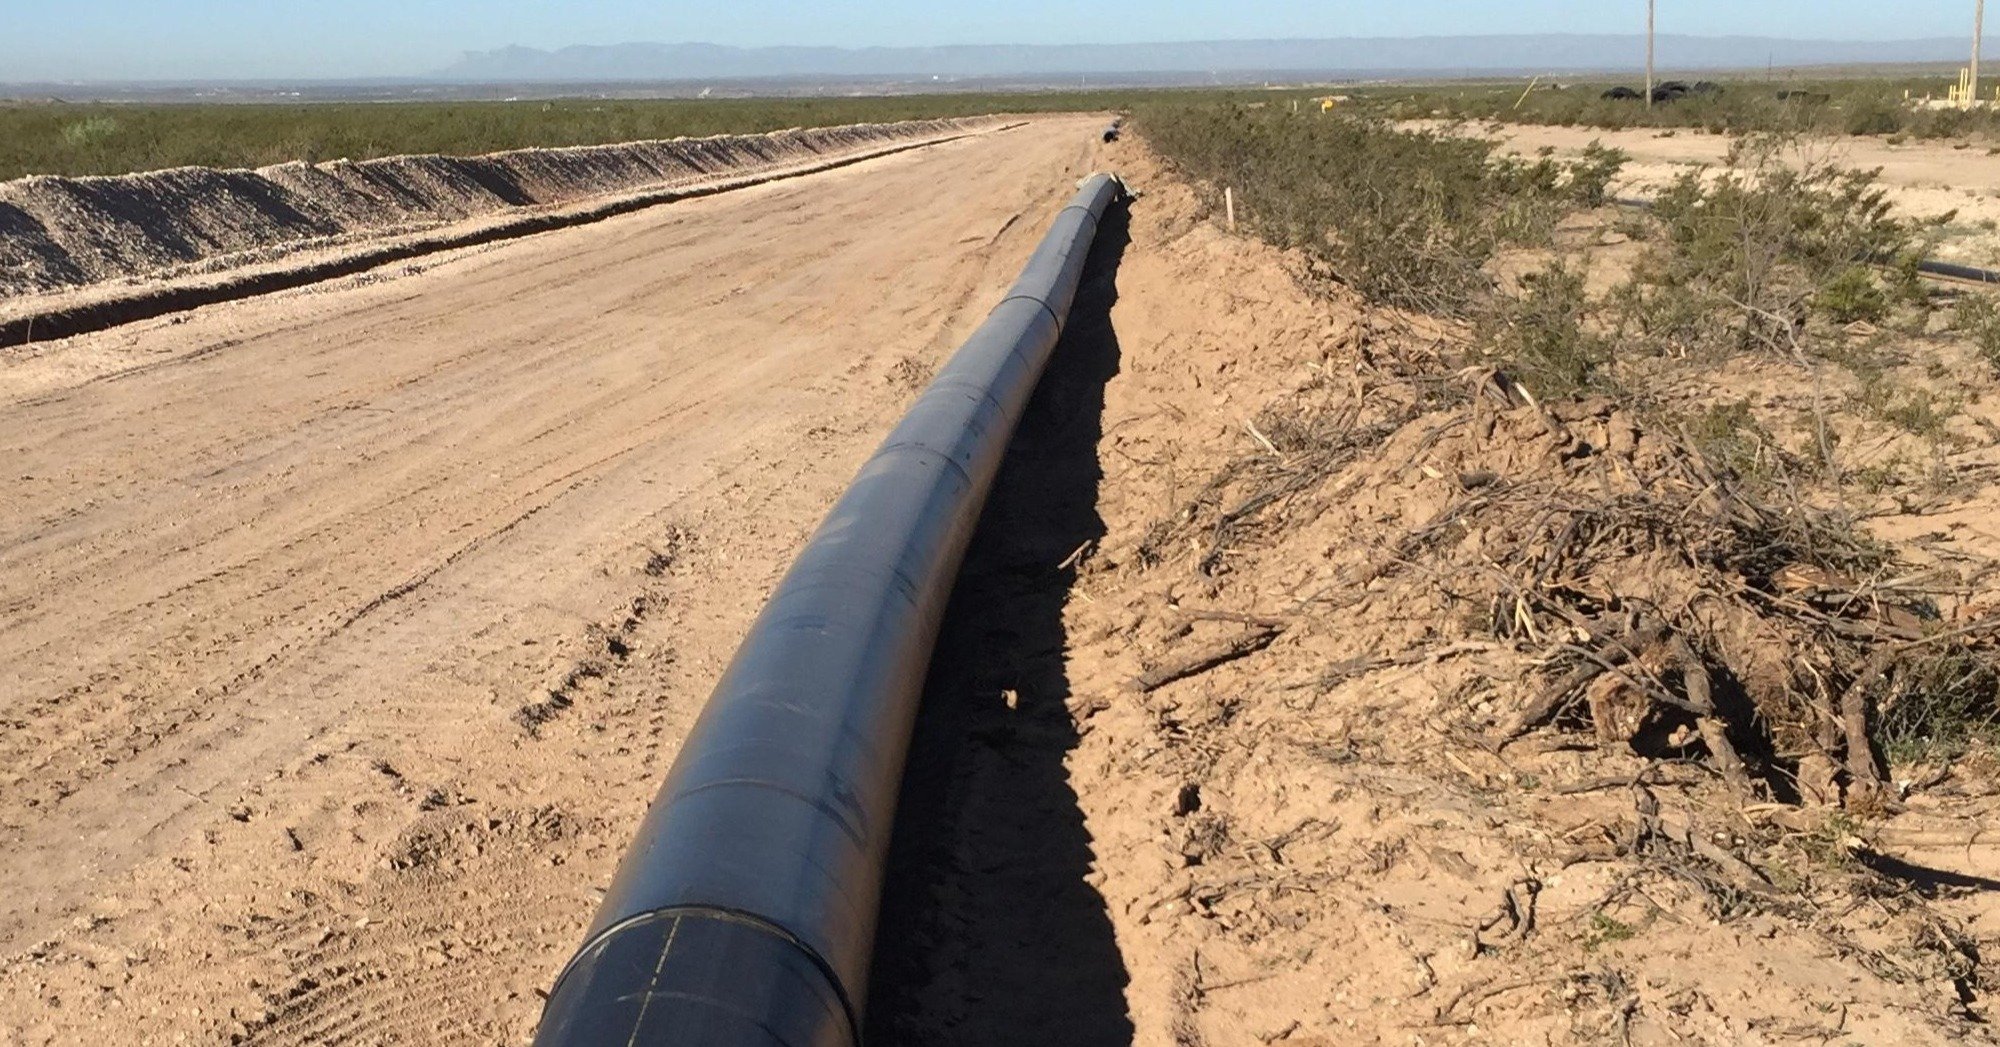 HDPE Pipe Installation Methods - An Overview of 6 Common Methods